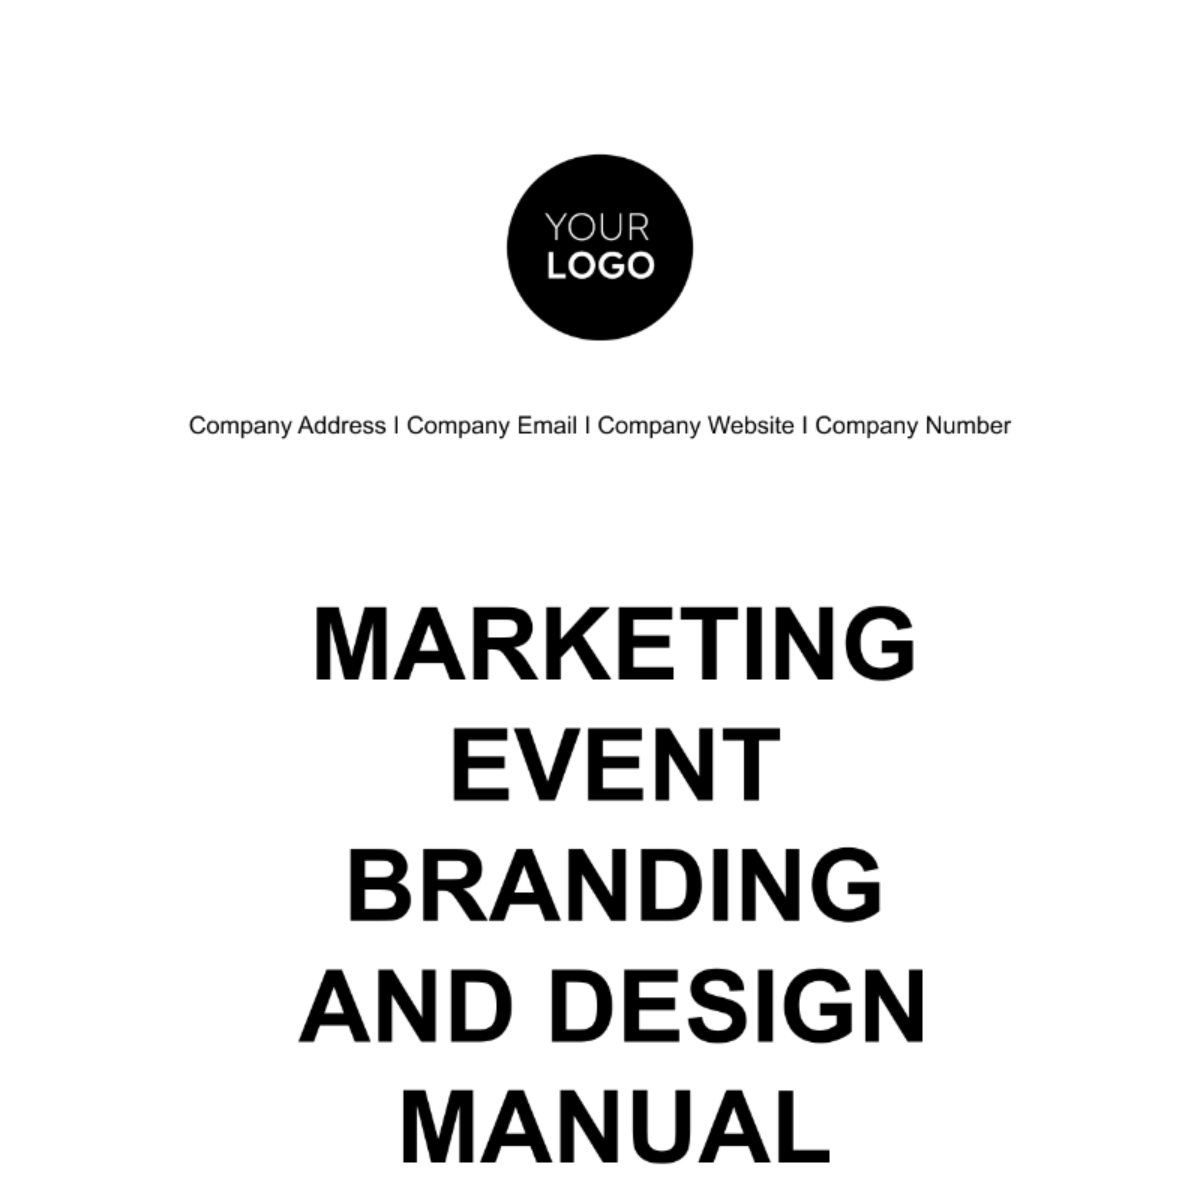 Marketing Event Branding and Design Manual Template